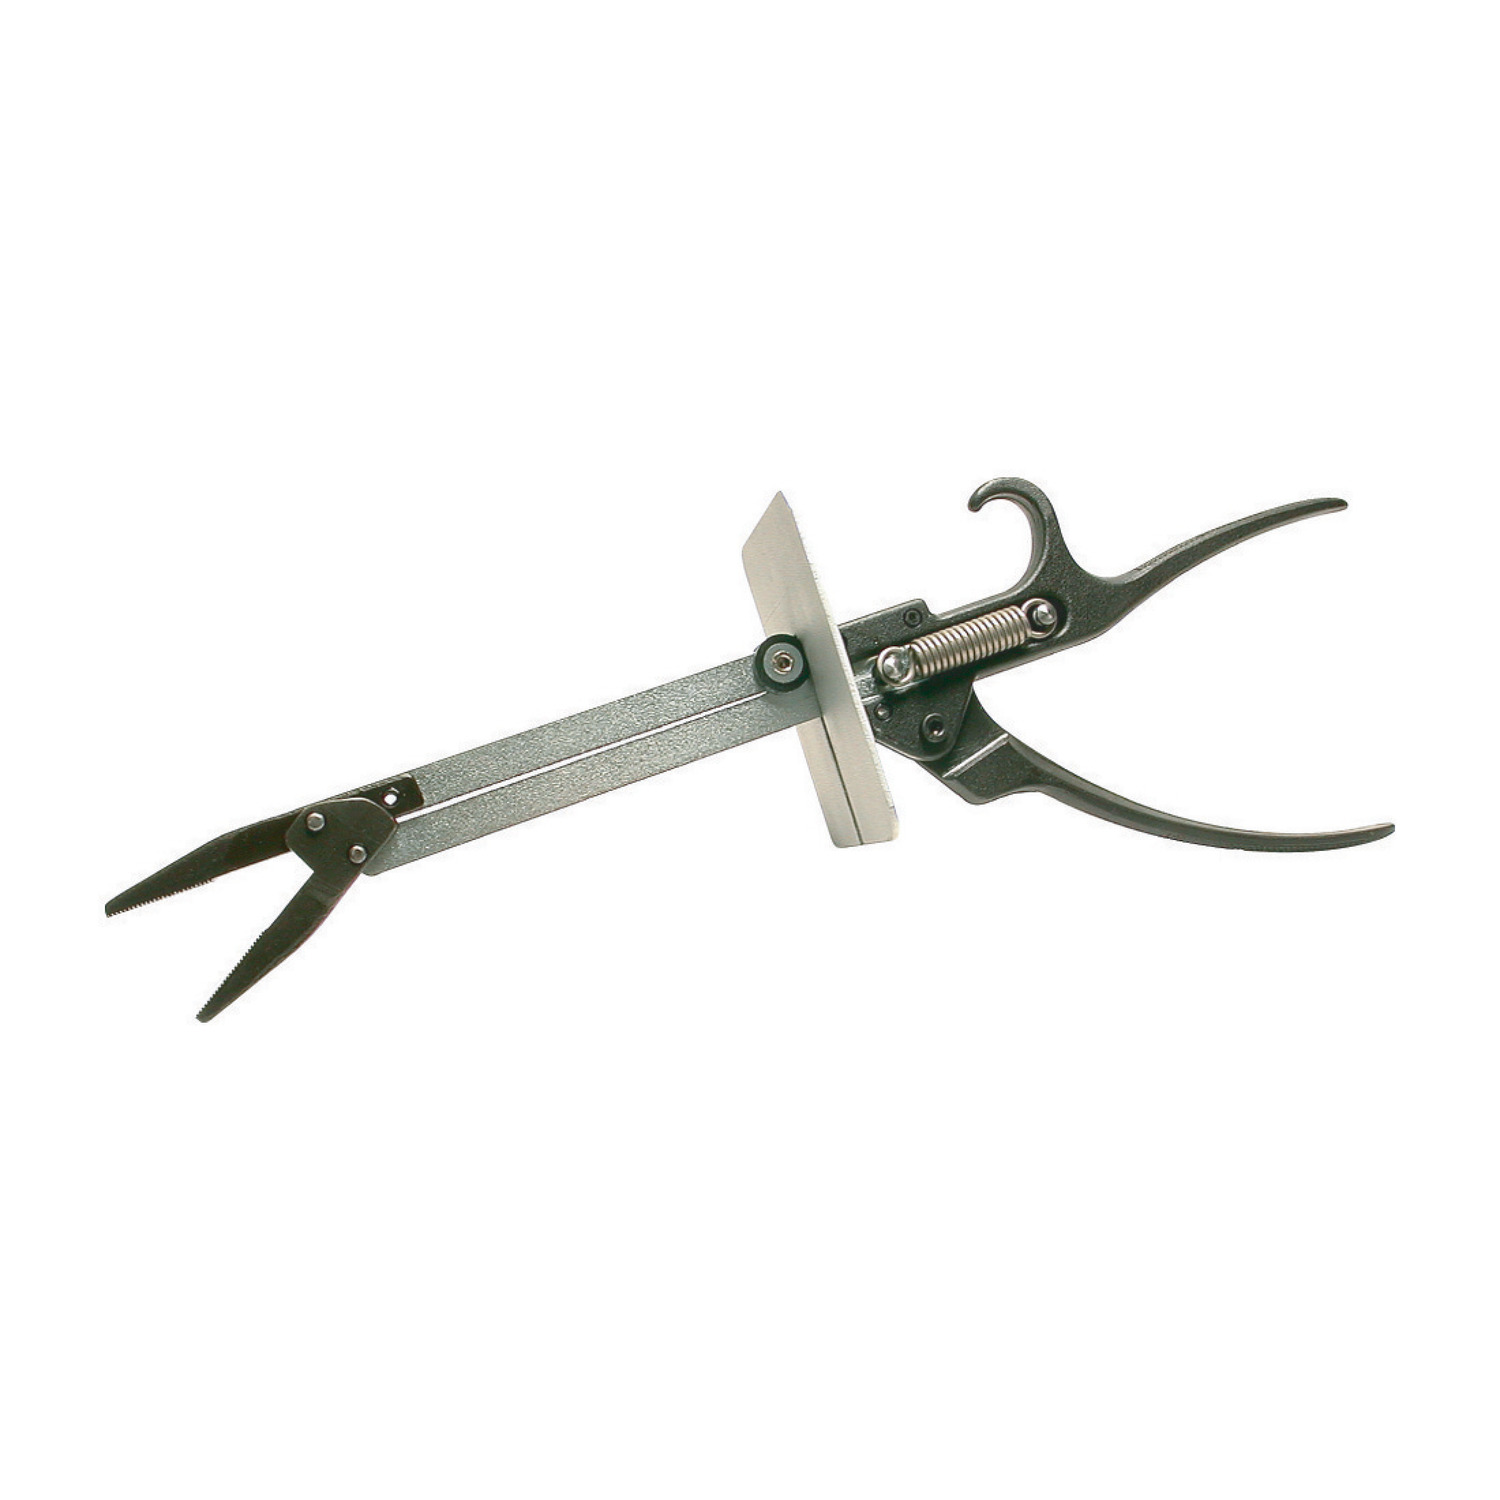 97060.W1025 Chip Pincers - with Guard alu plate guard Also known as HT0920.11-025